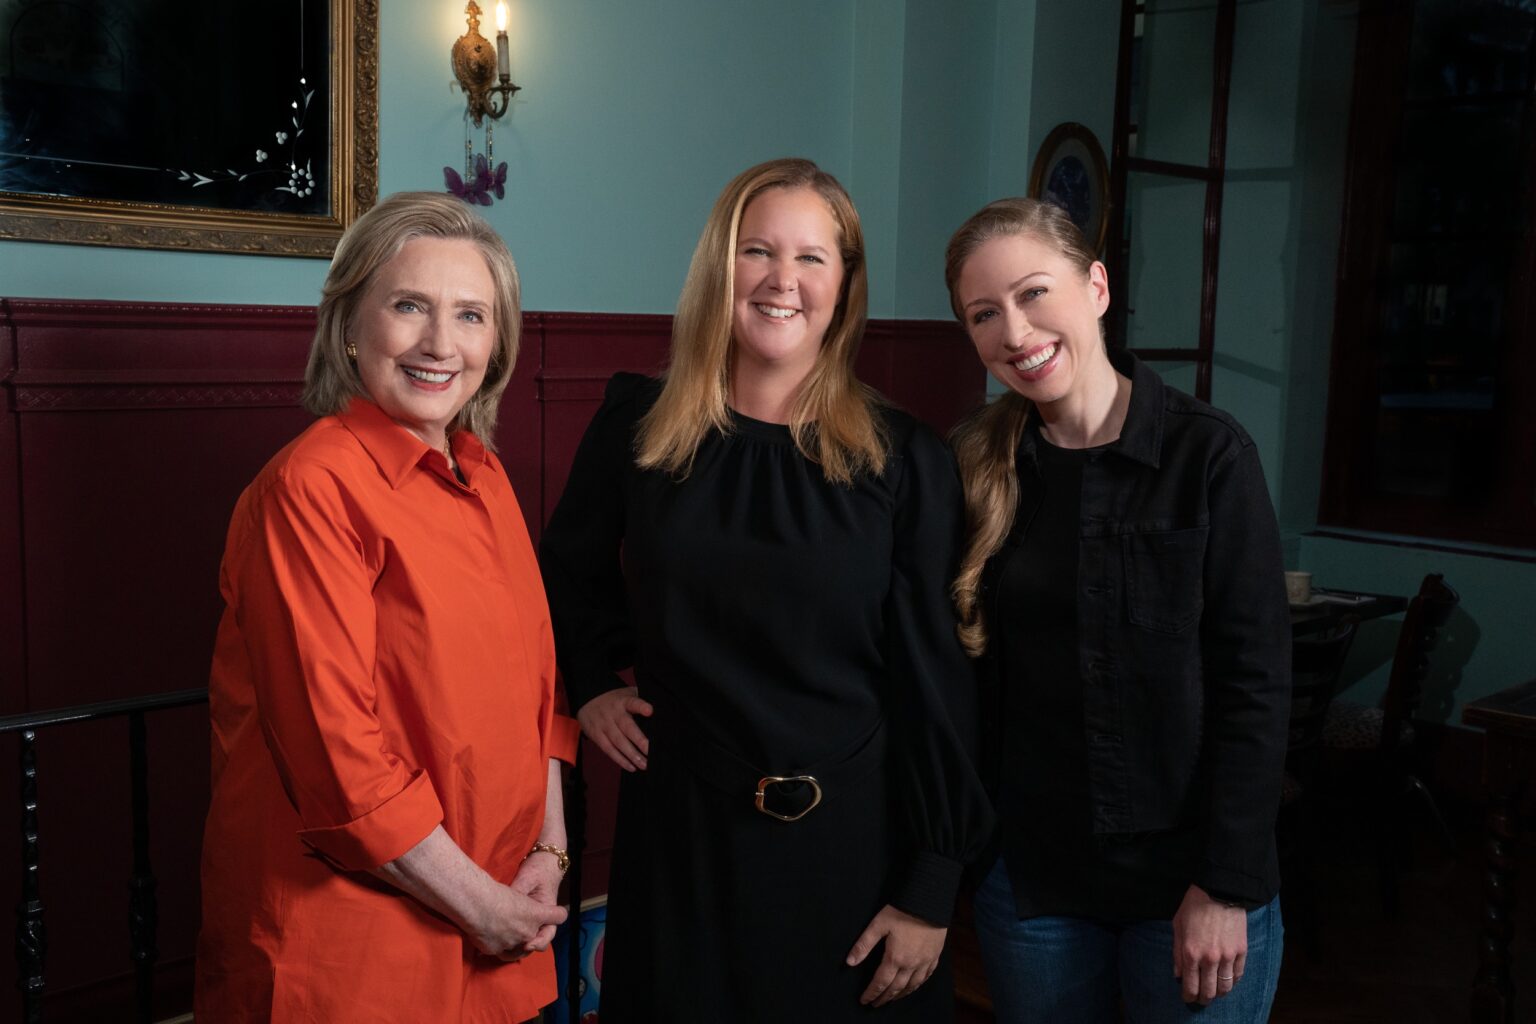 Gutsy review Apple TV+: Gutsy women Hillary Clinton, Amy Schumer and Chelsea Clinton.